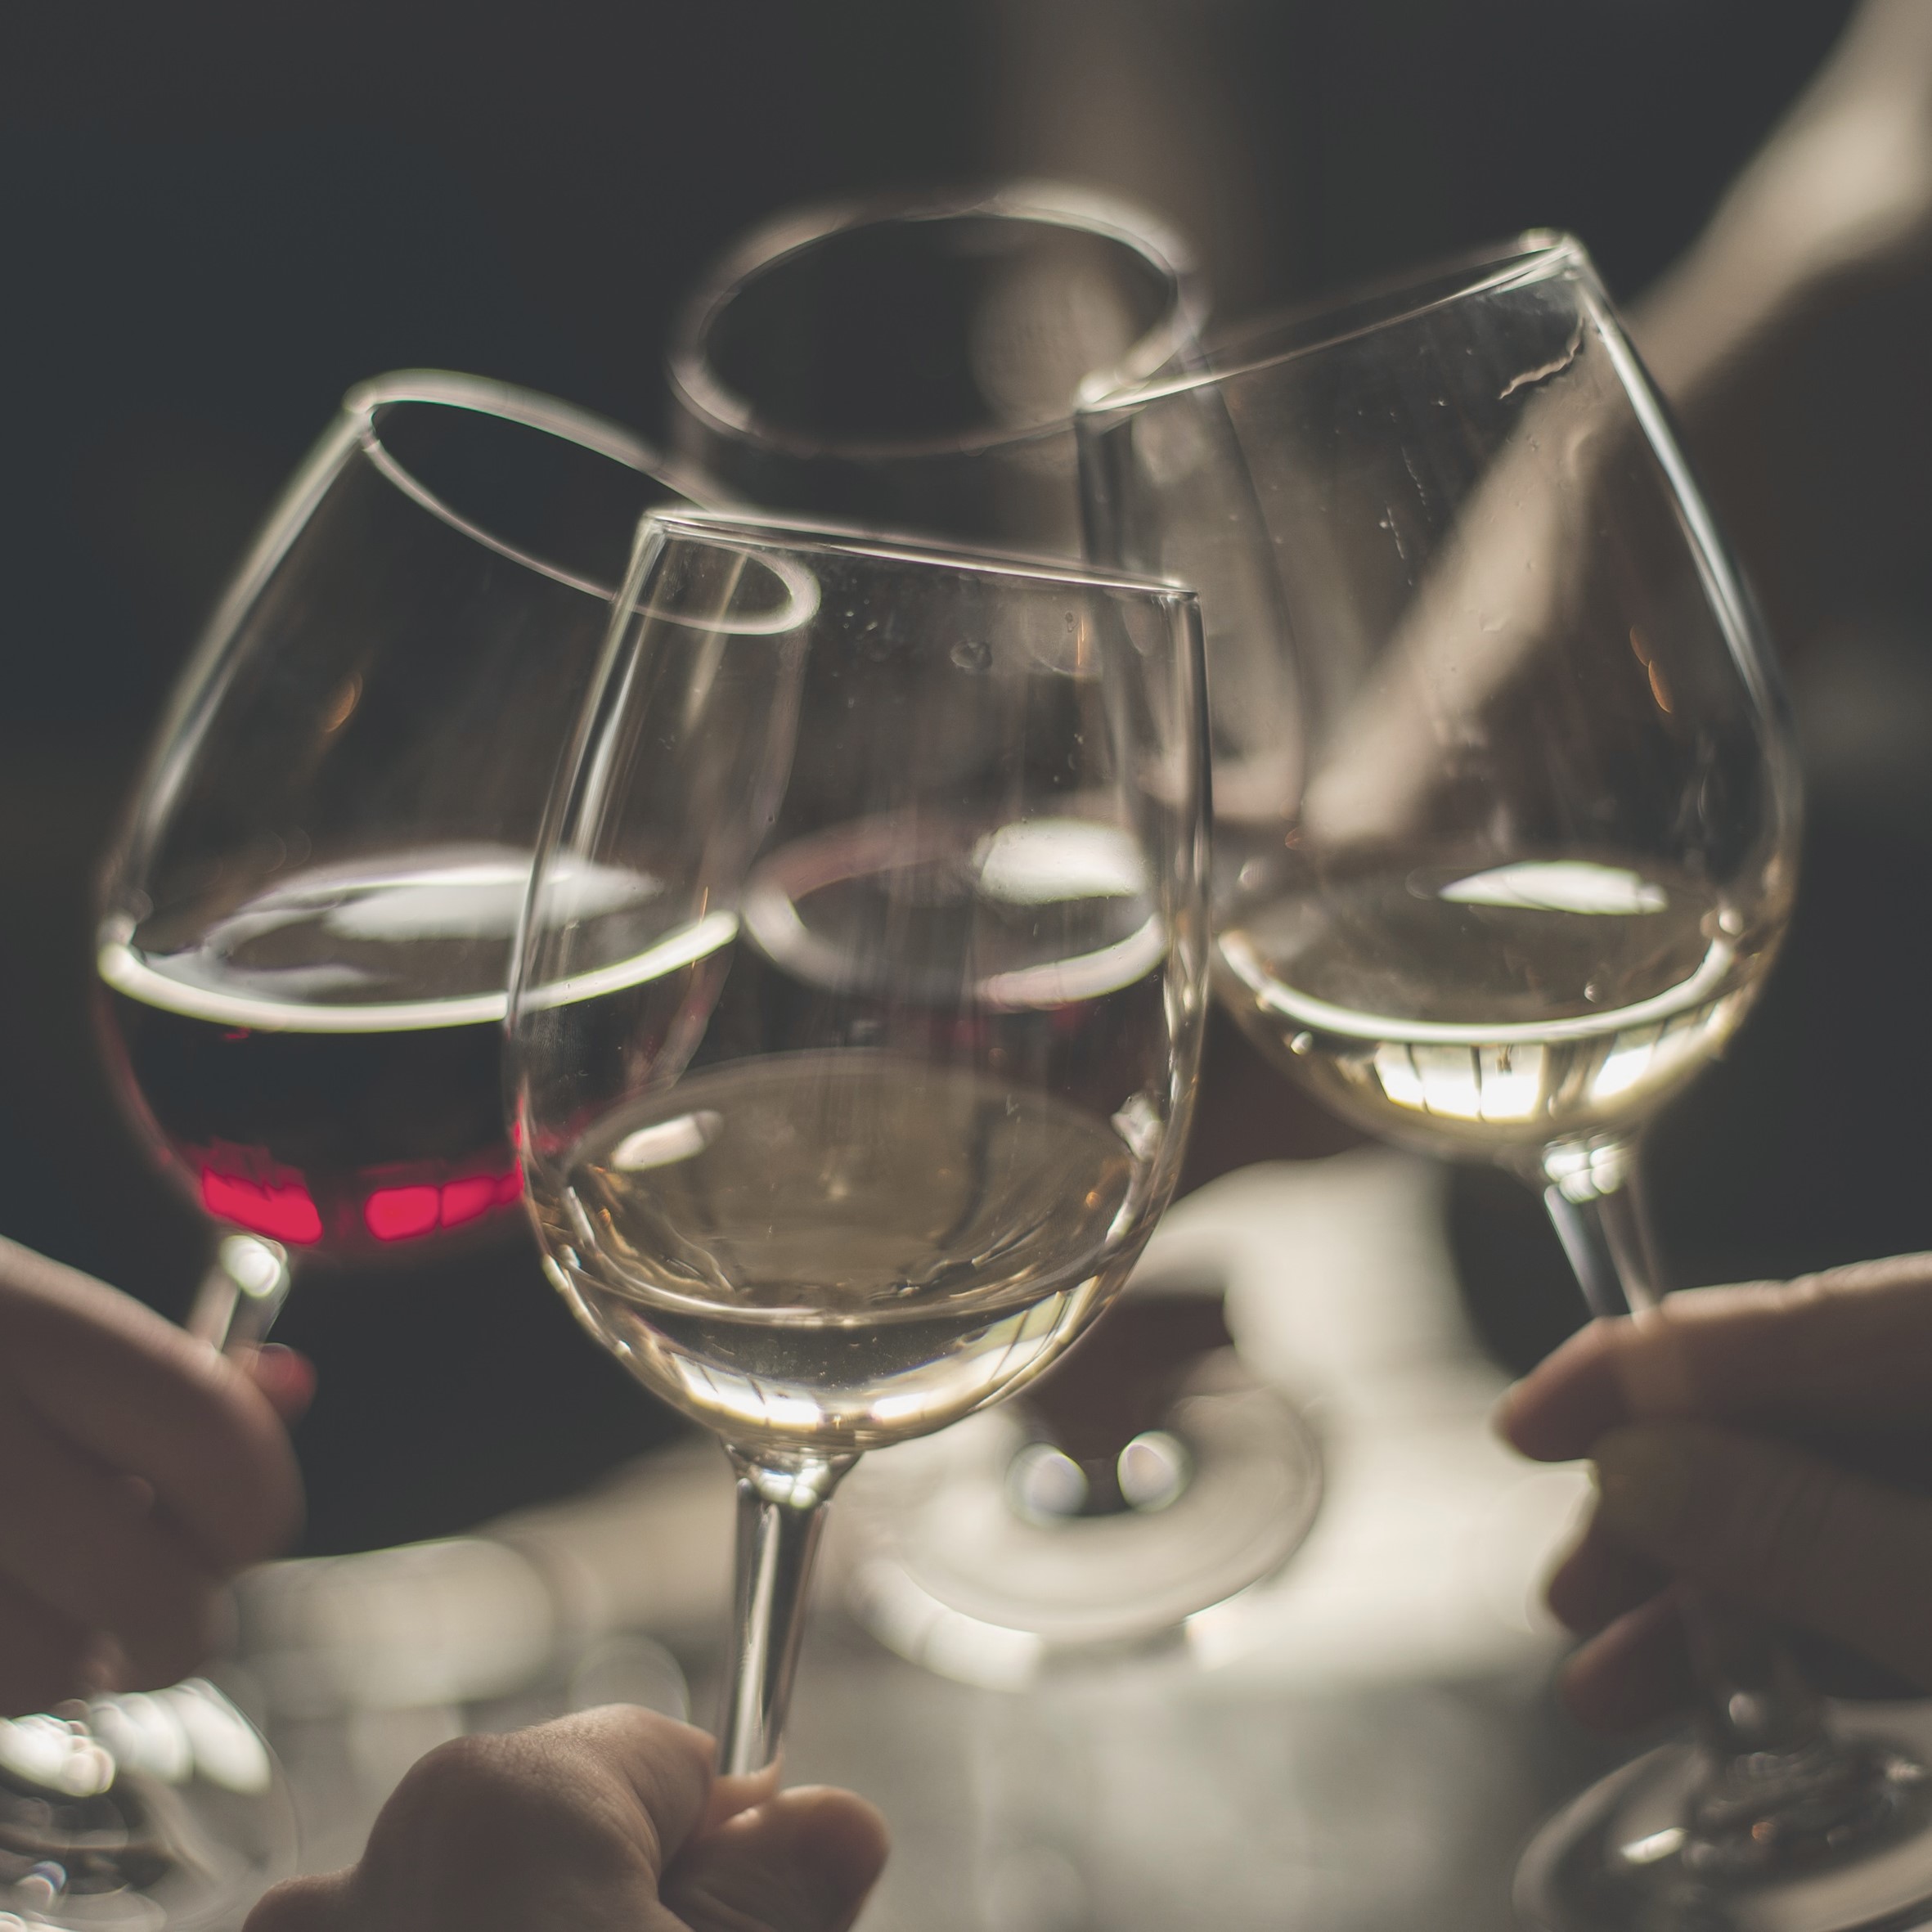 UK On trade - Wine consumption surged in select markets in 2020 – but how will consumer behaviour change going forward?